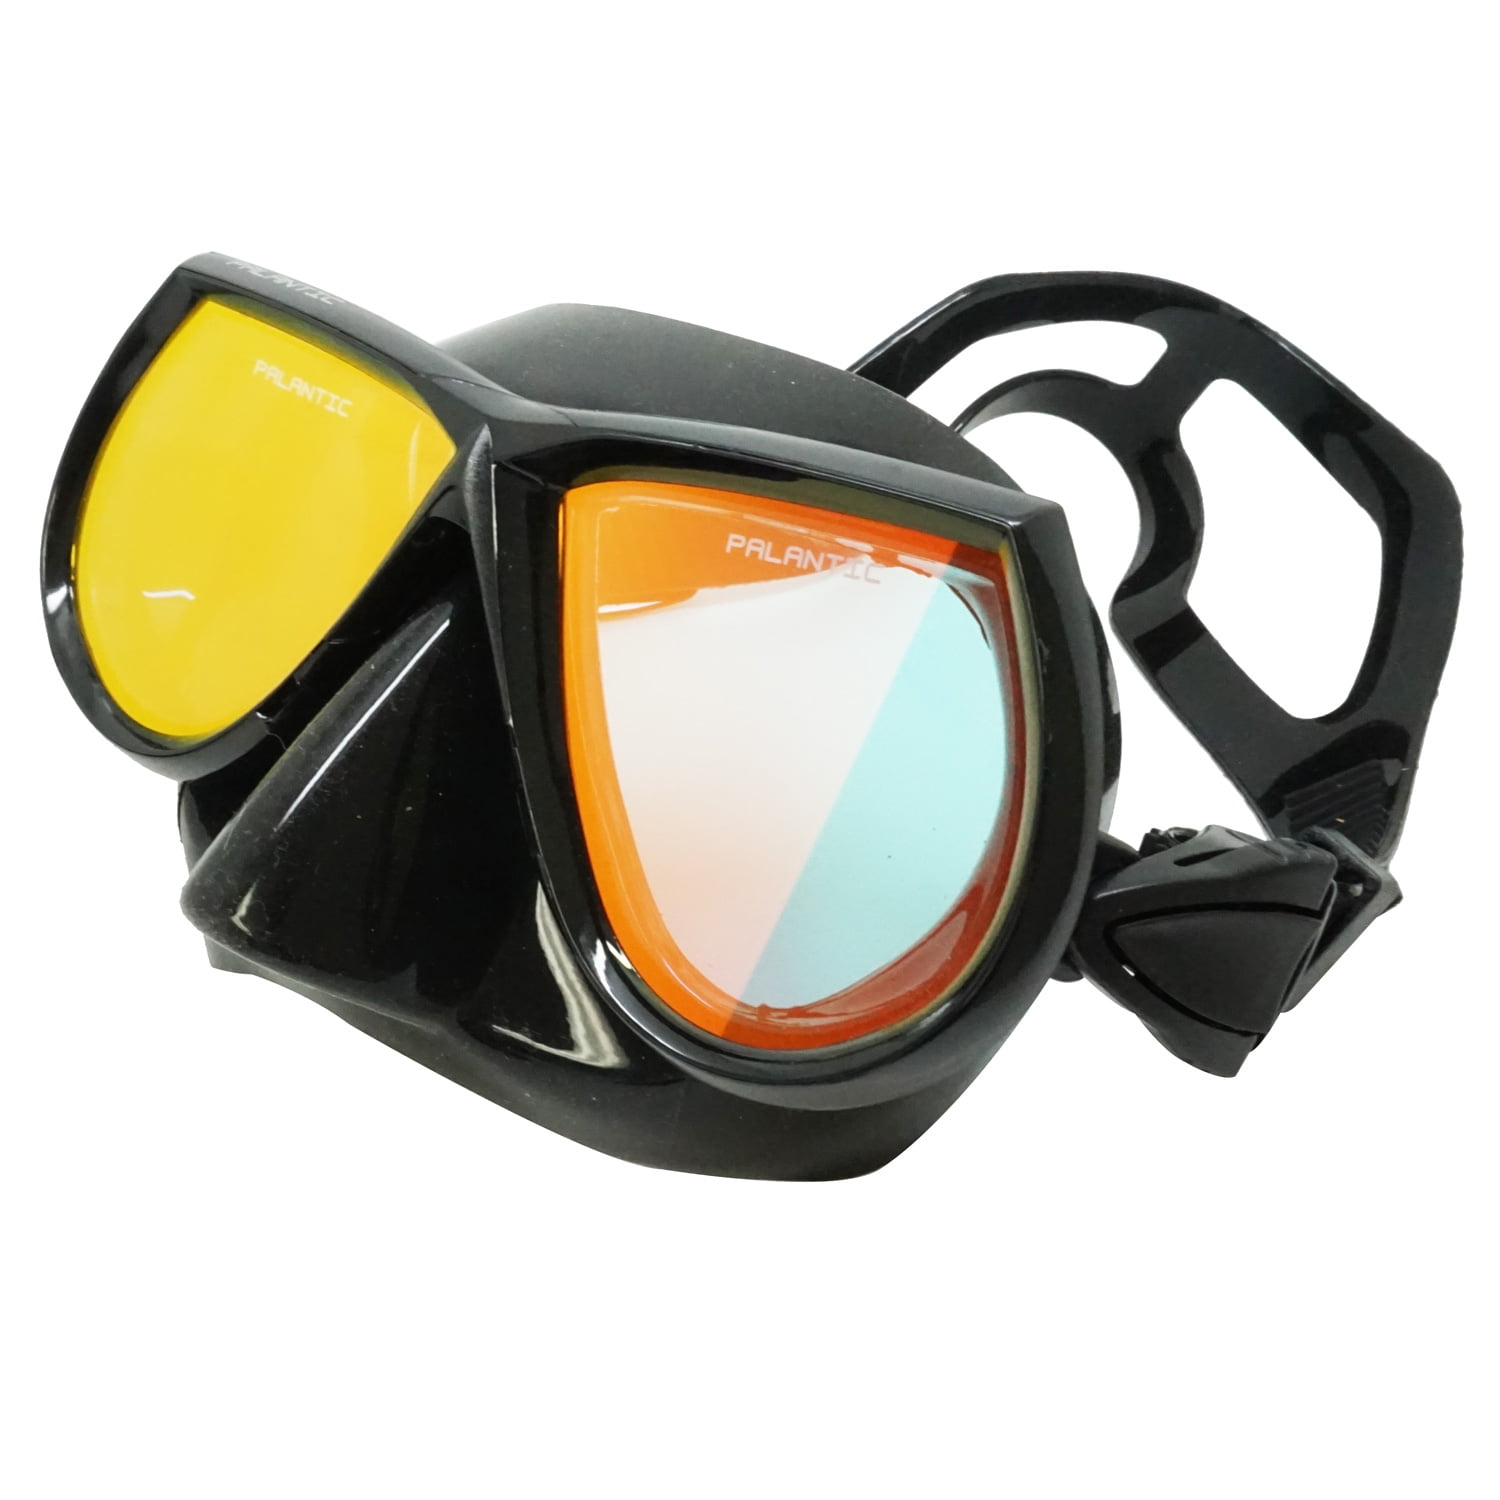 Palantic Spearfishing Free Dive Low Volume Black Mask With Mirror